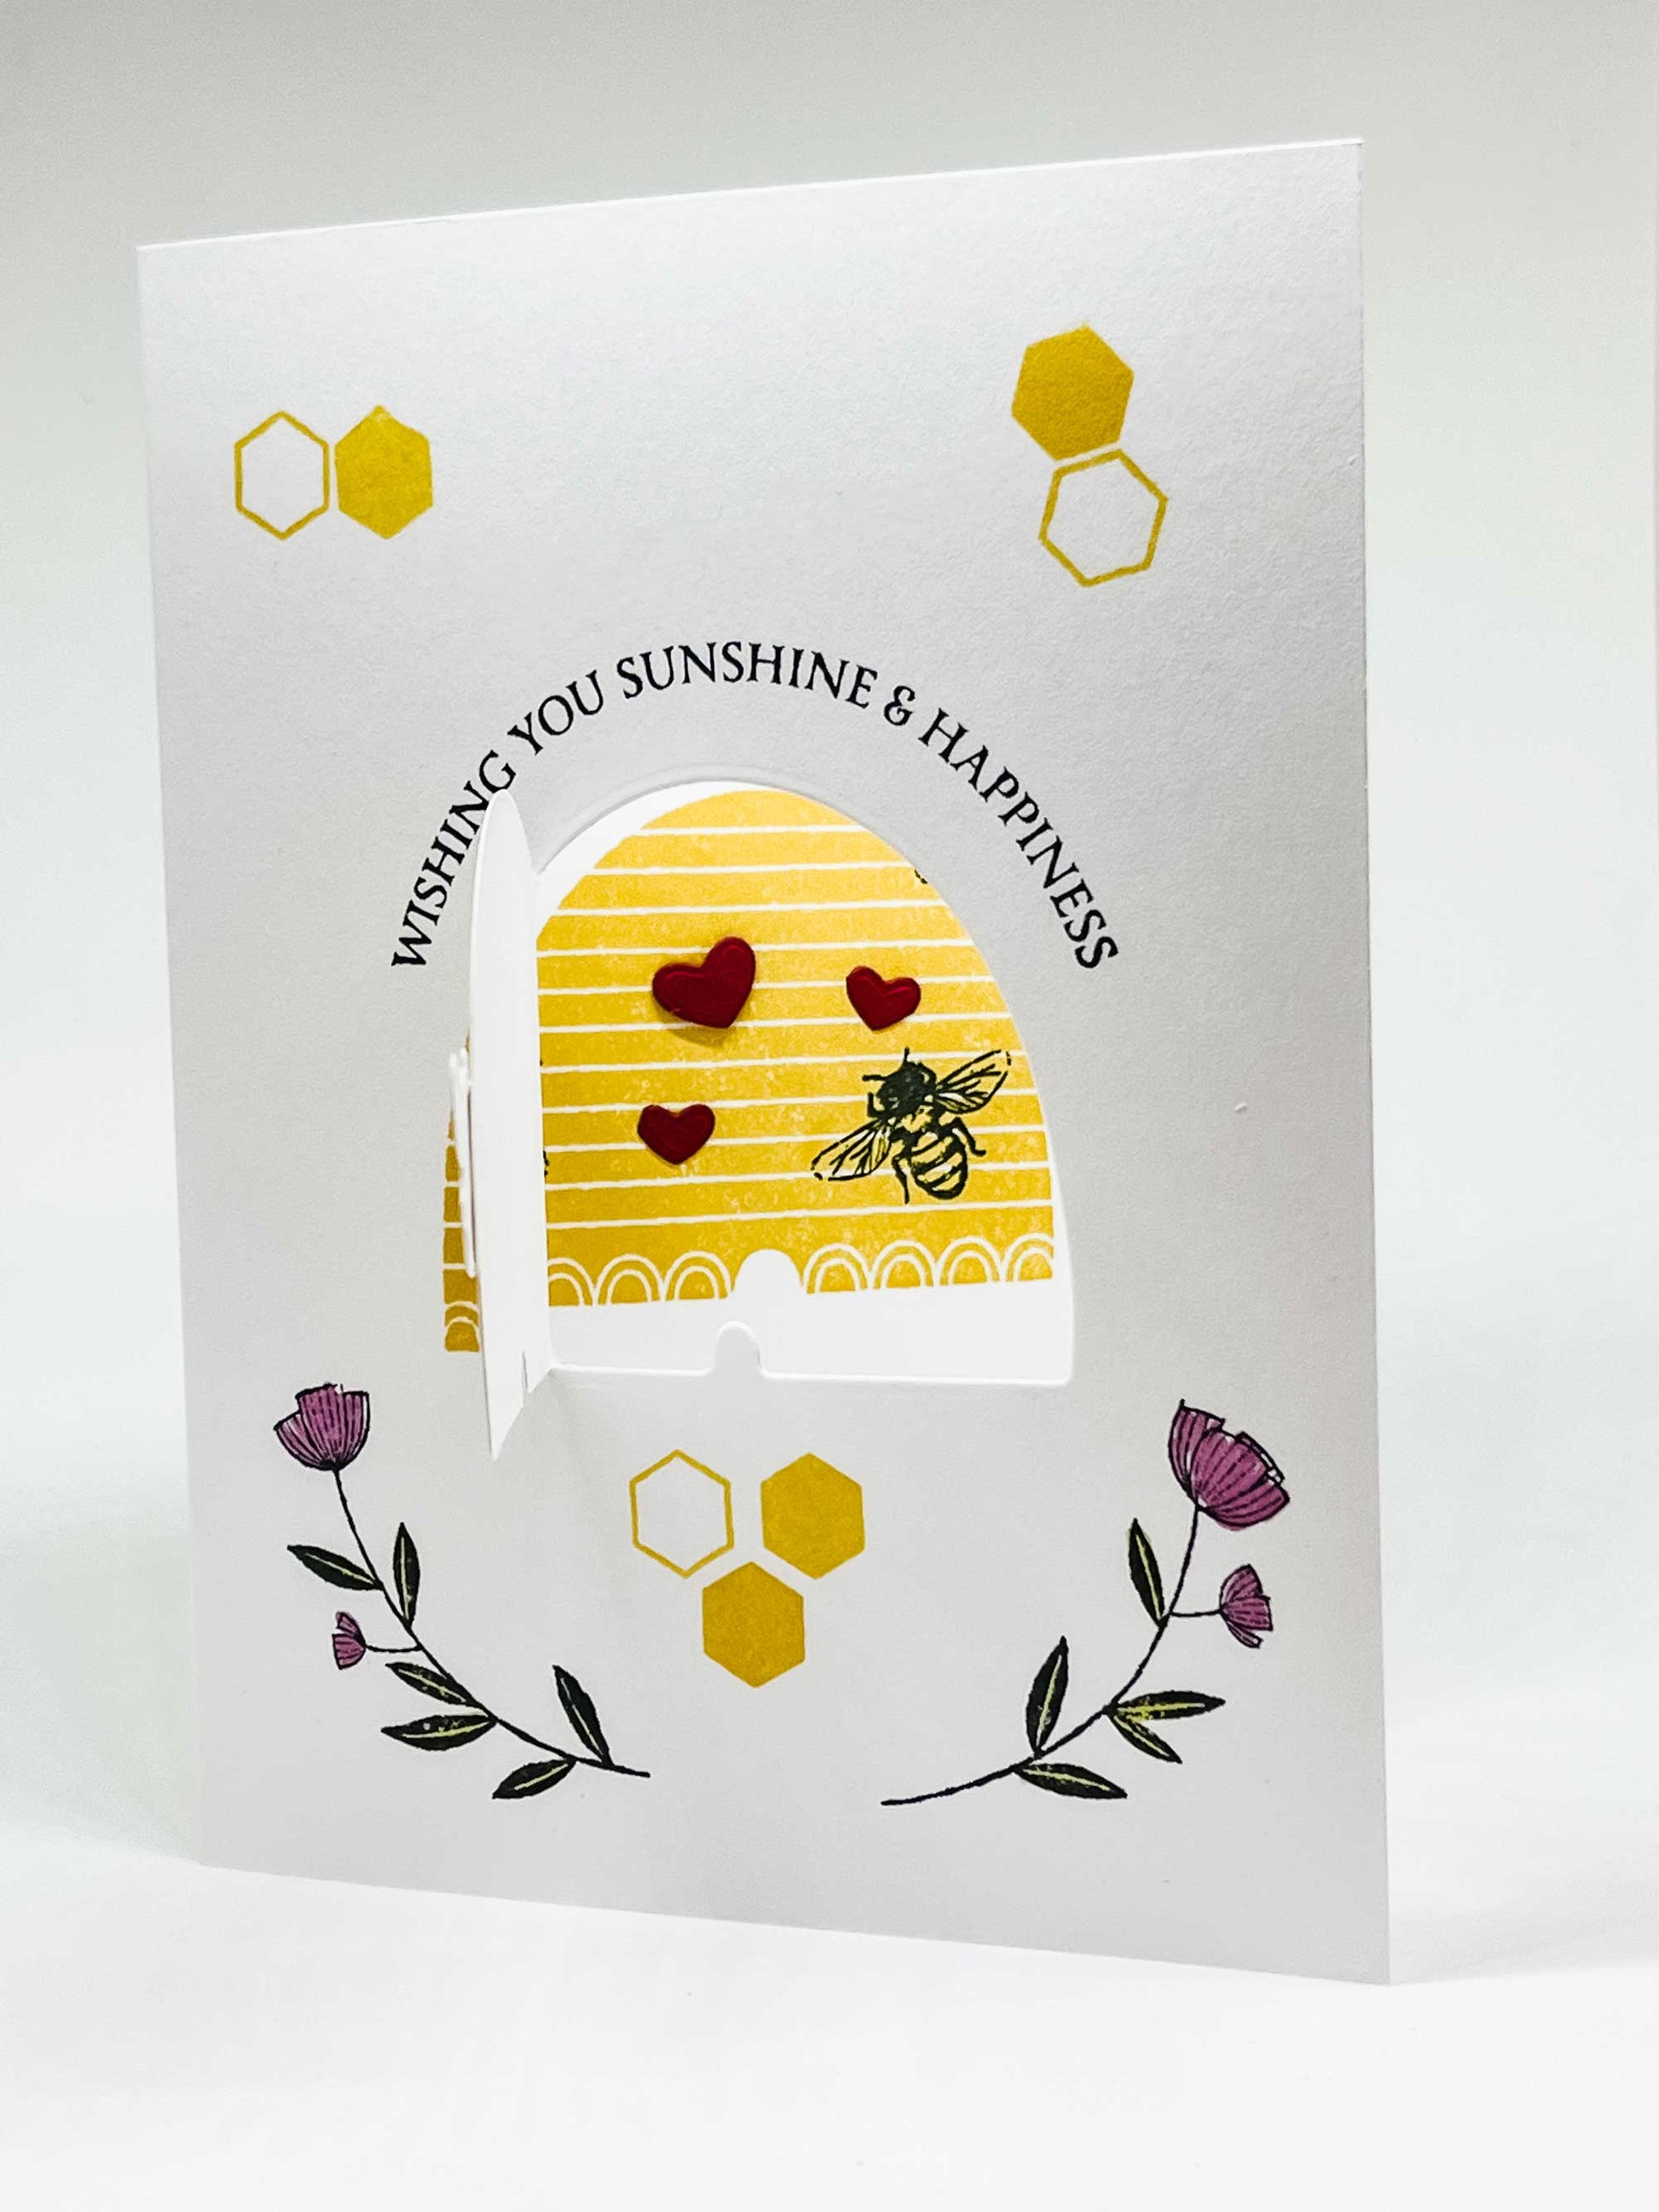 Pop-up greeting card with honeybee on a hive surrounded by hearts and flowers and text that wishing you sunshine & happiness